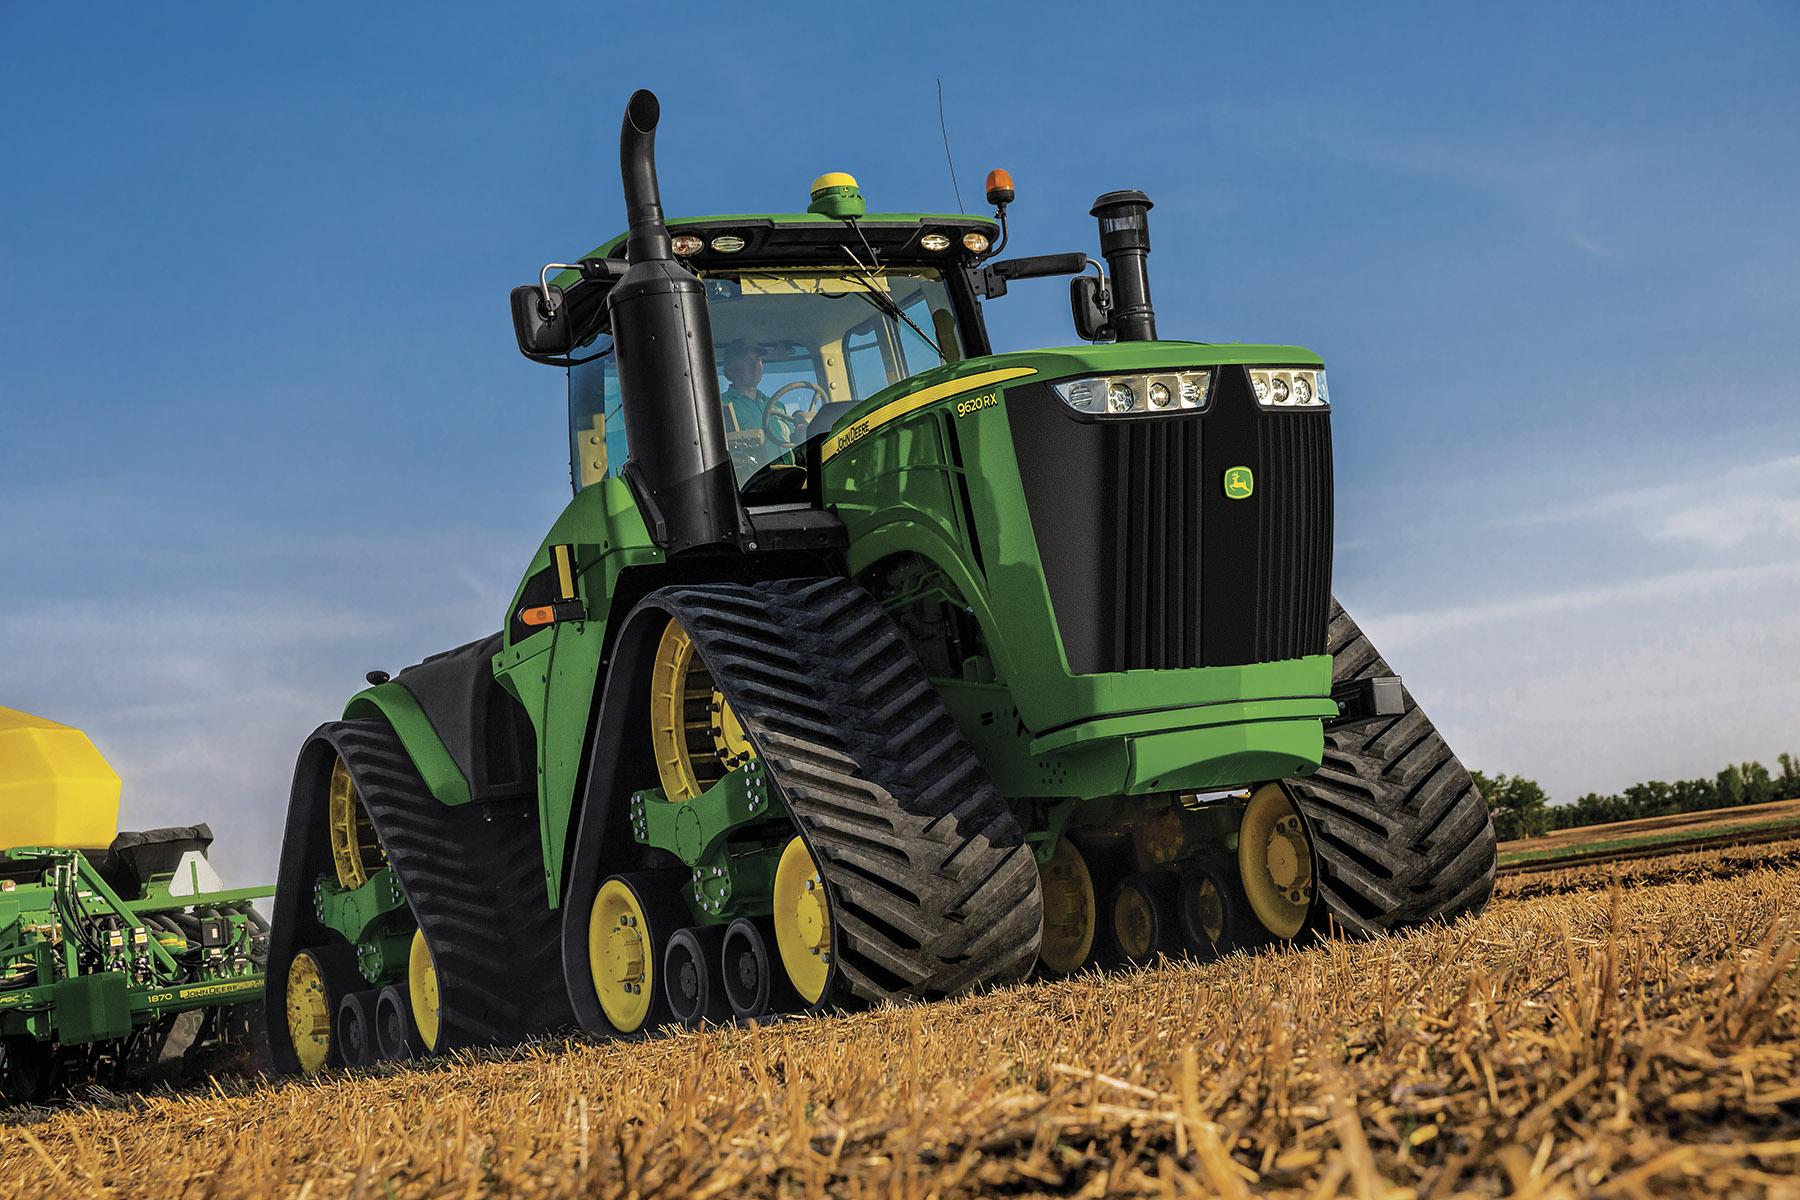 John Deere yourself with the new 9RX. Share your pics from the #FarmProgressShow #JD9RX